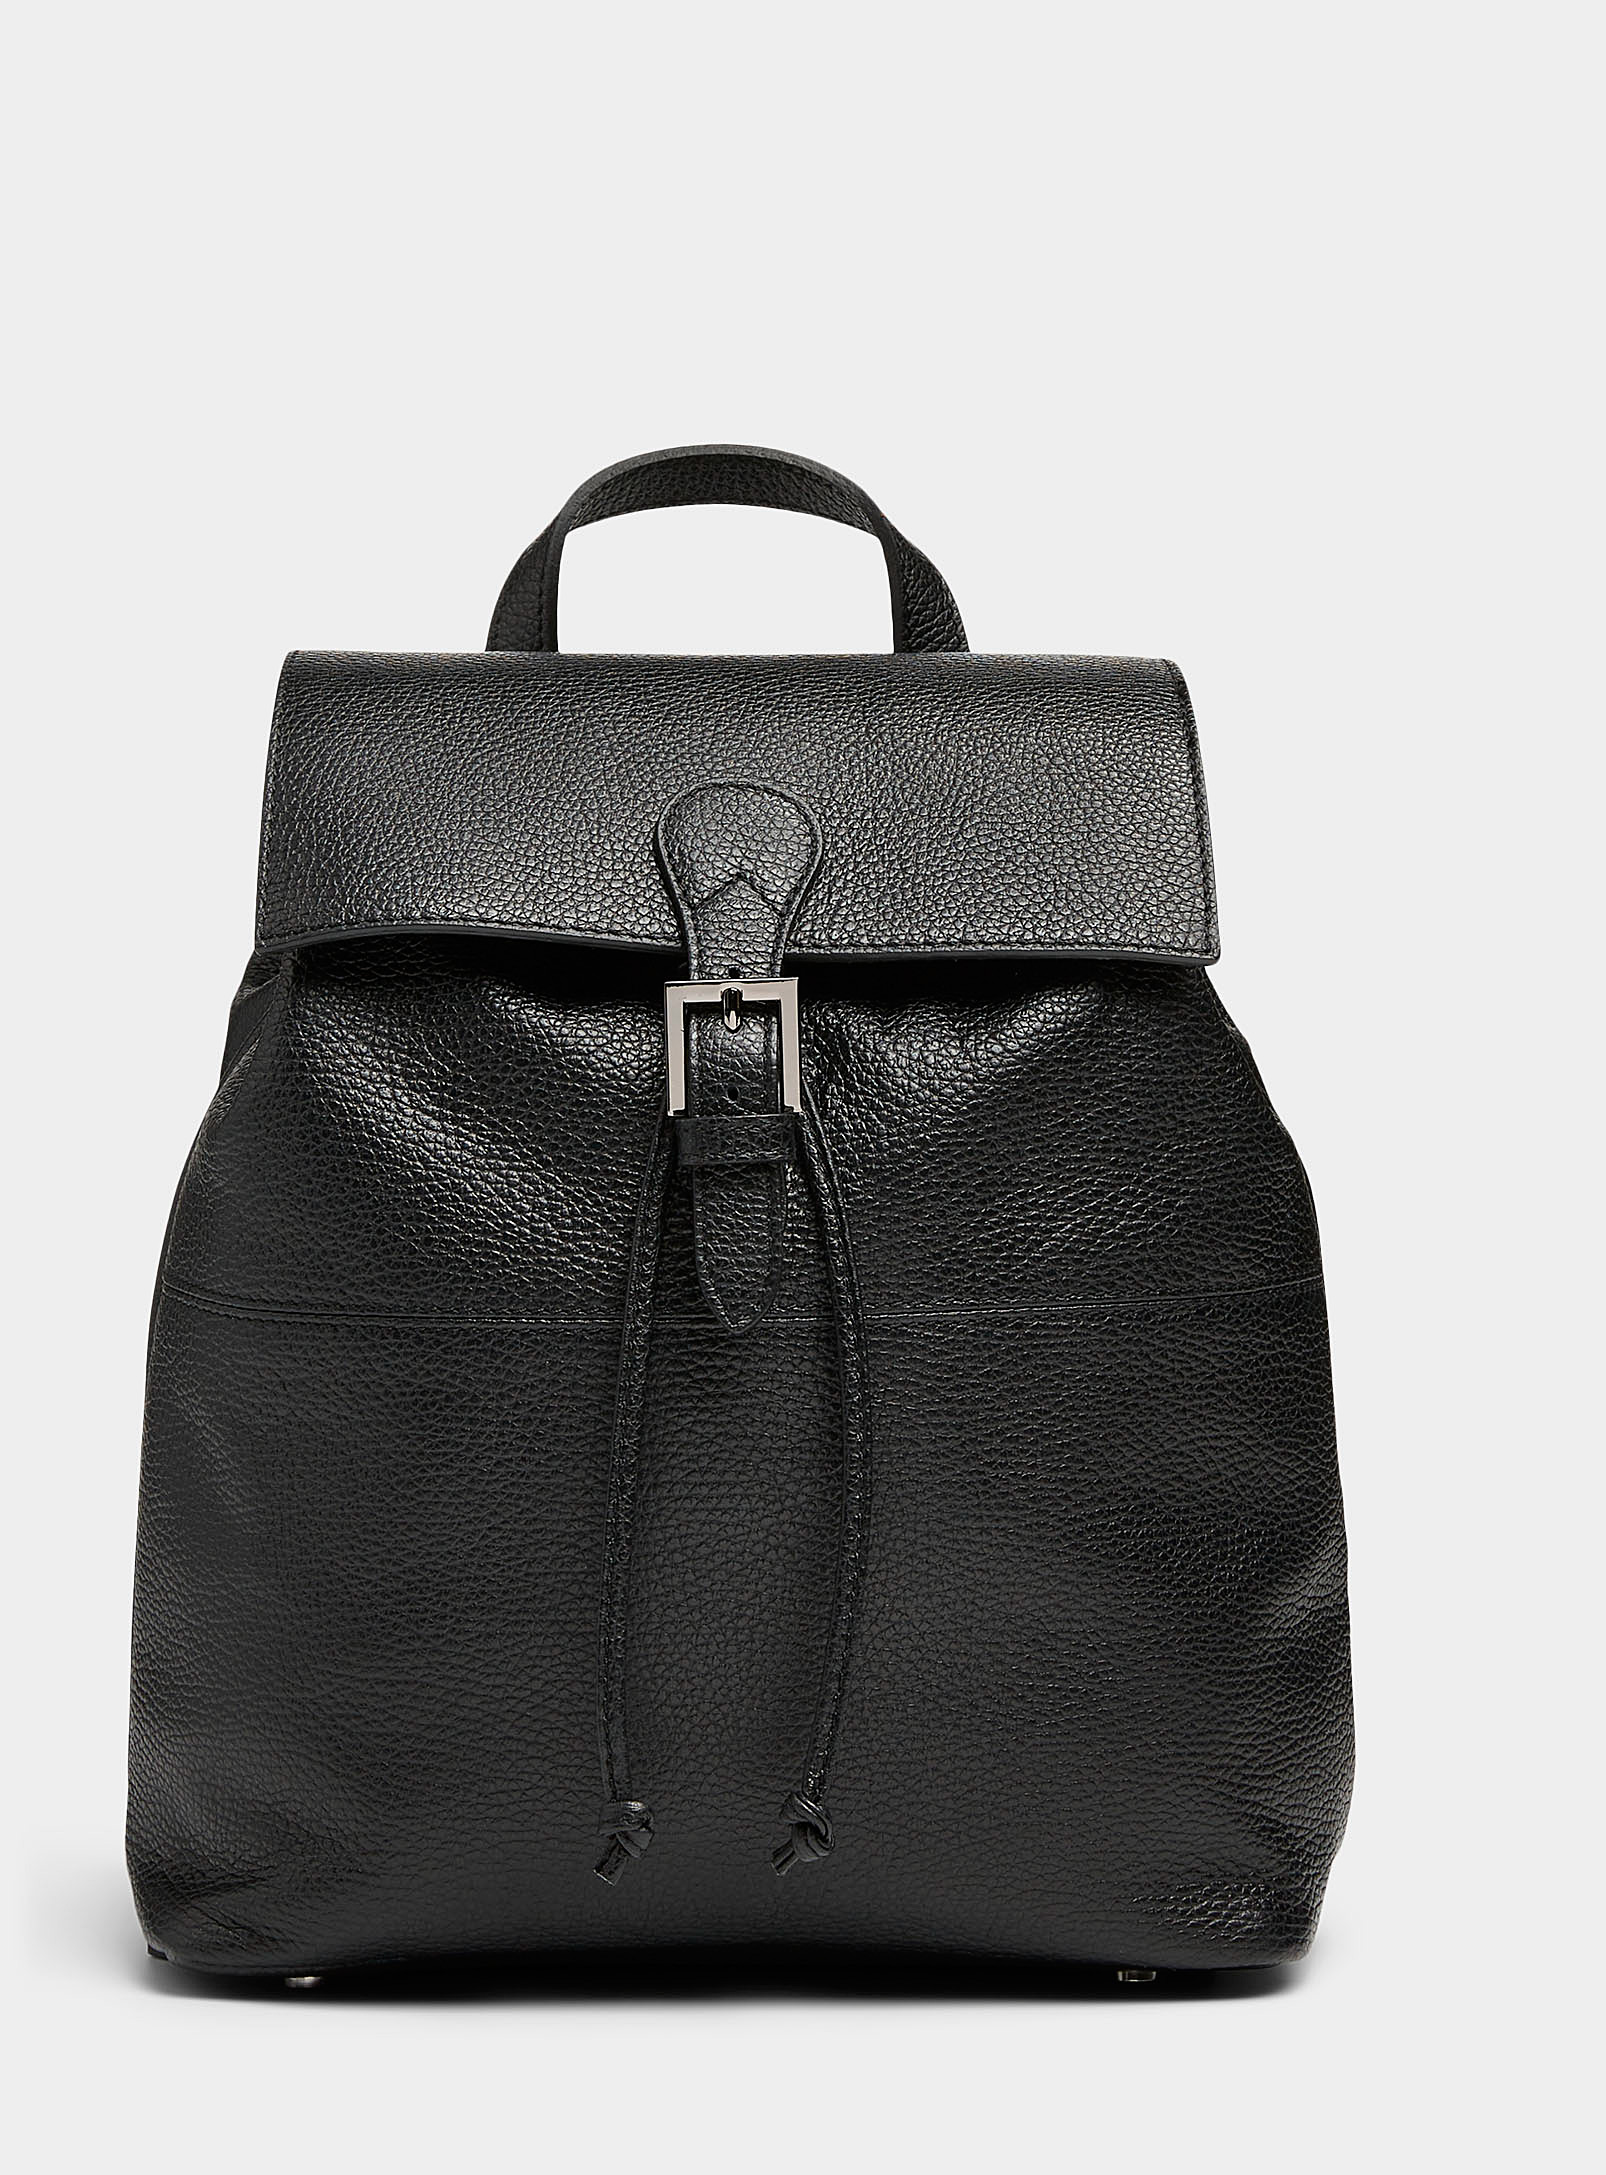 Simons - Women's Pebbled leather topstitched flap backpack Exclusive collection from Italy